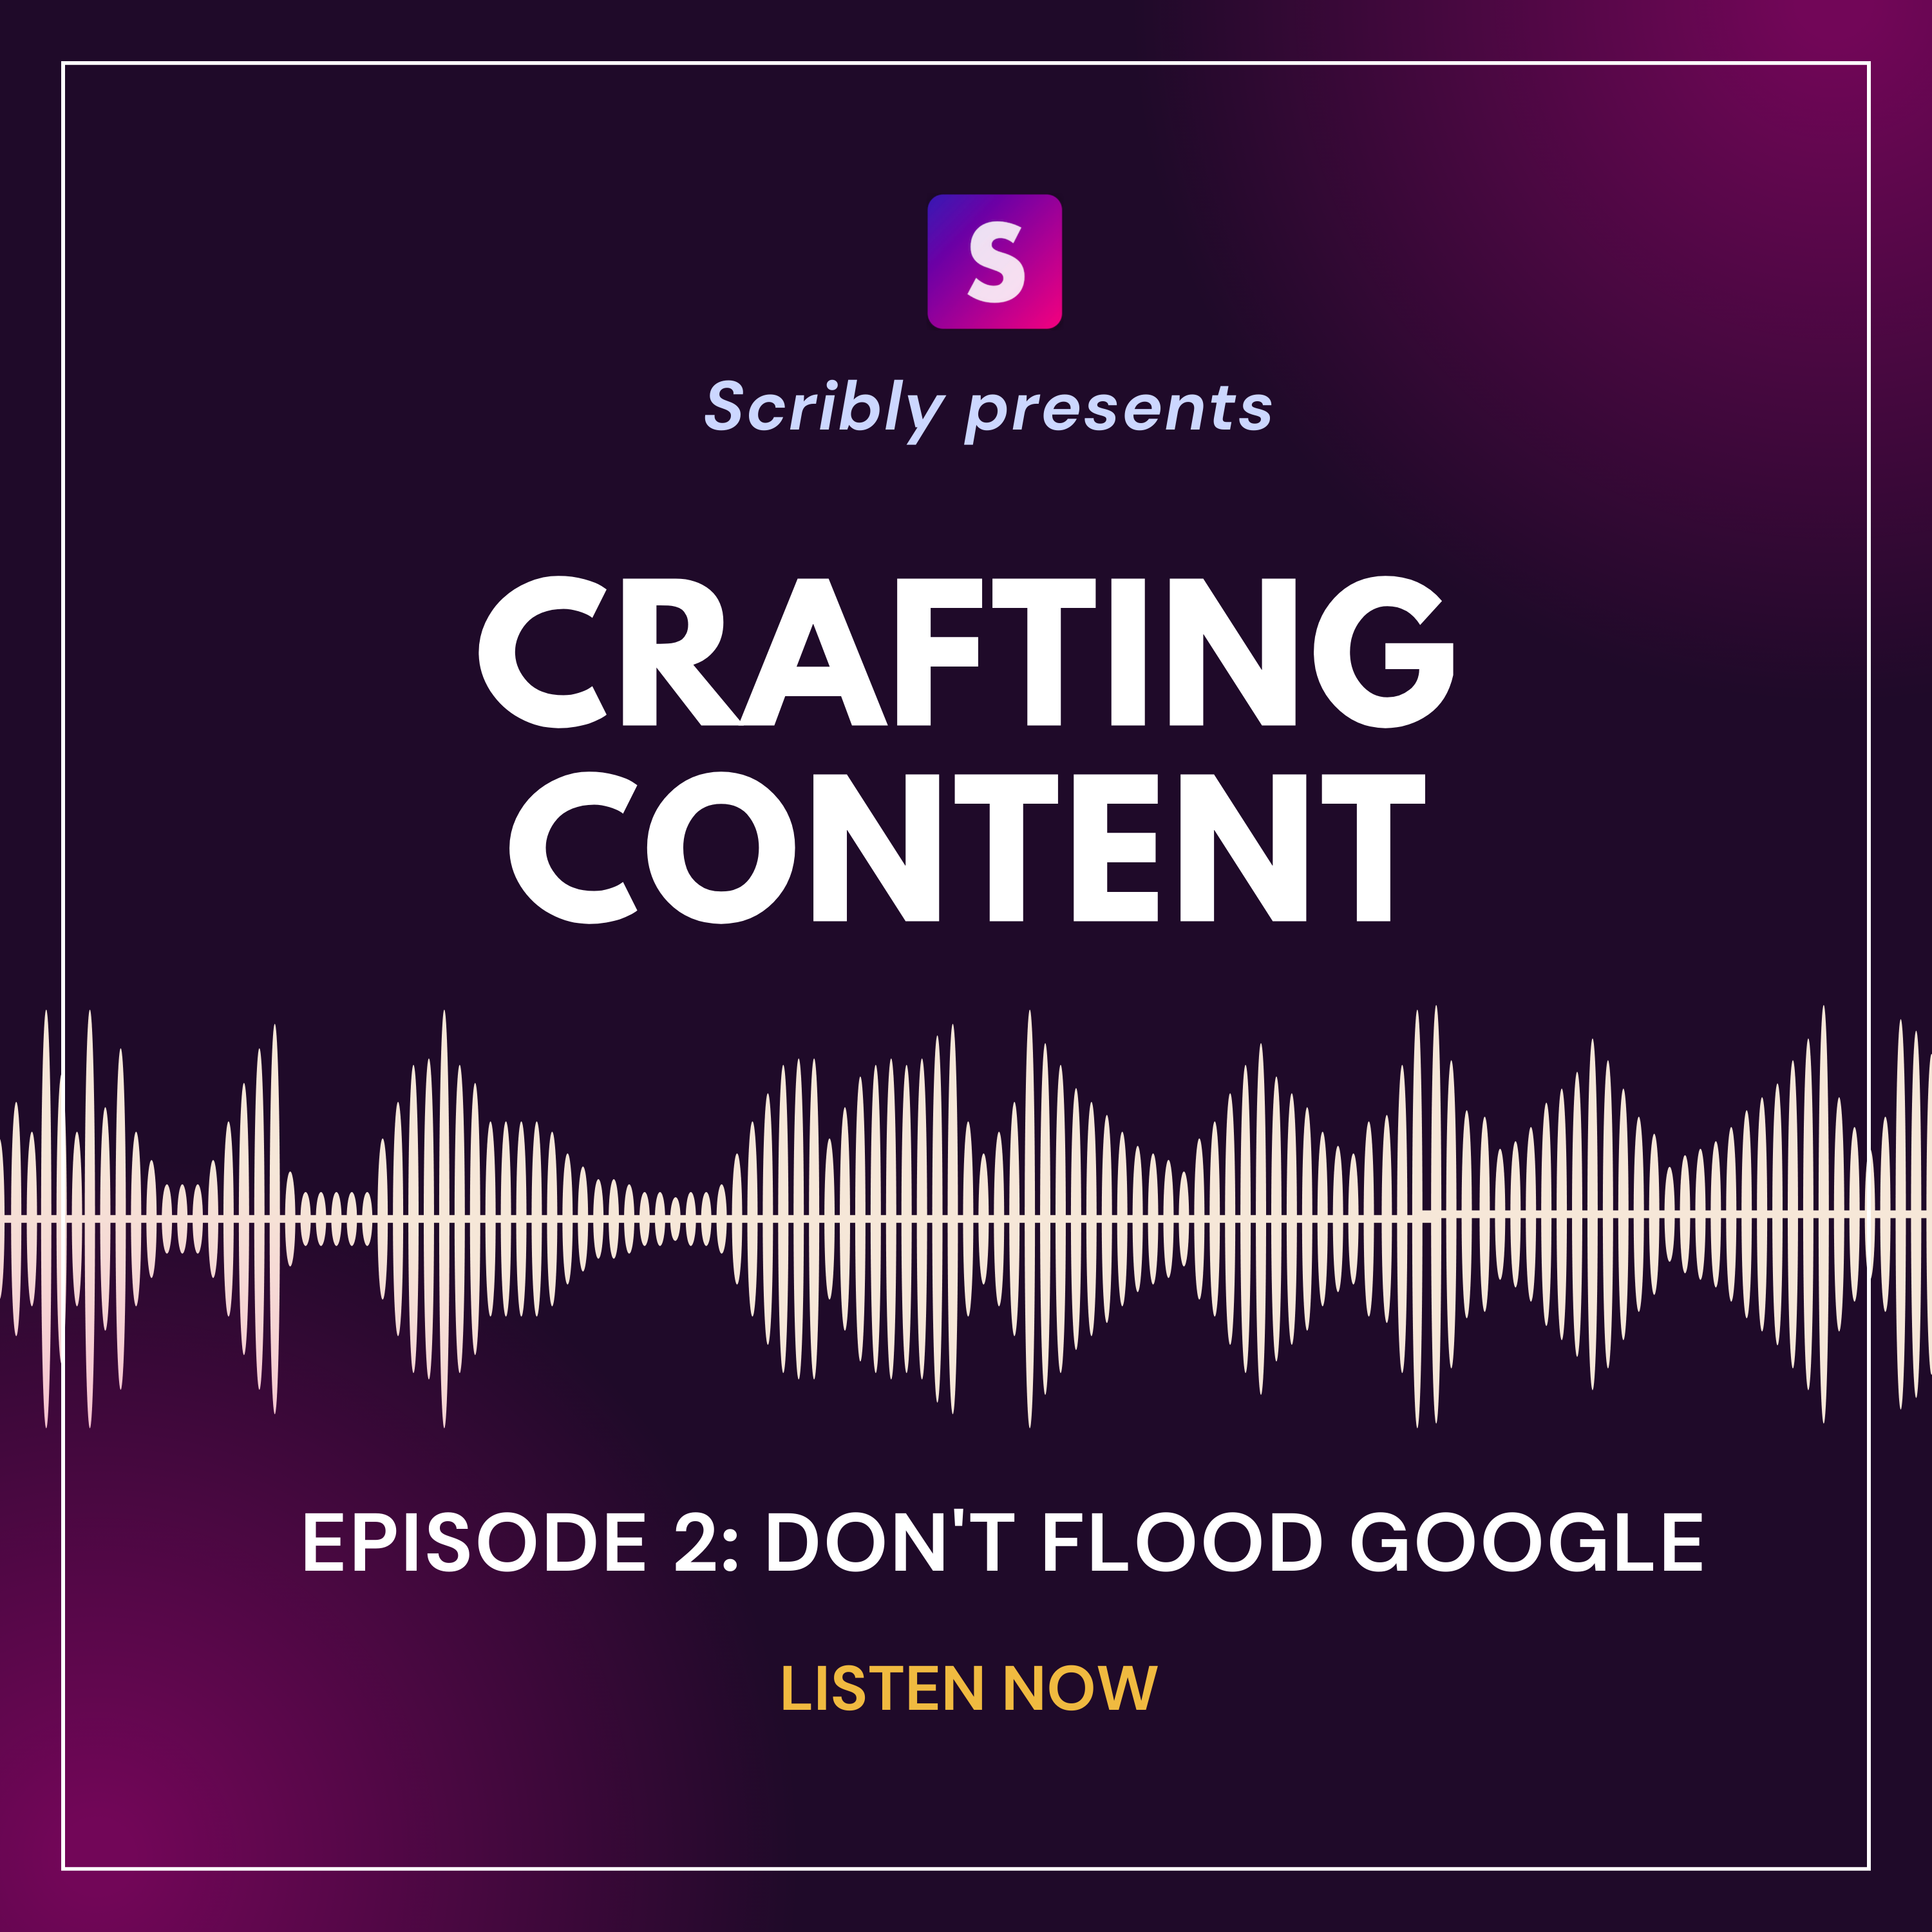 Scribly's content marketing podcast, Crafting Content. Episode 2: Don't Flood Google